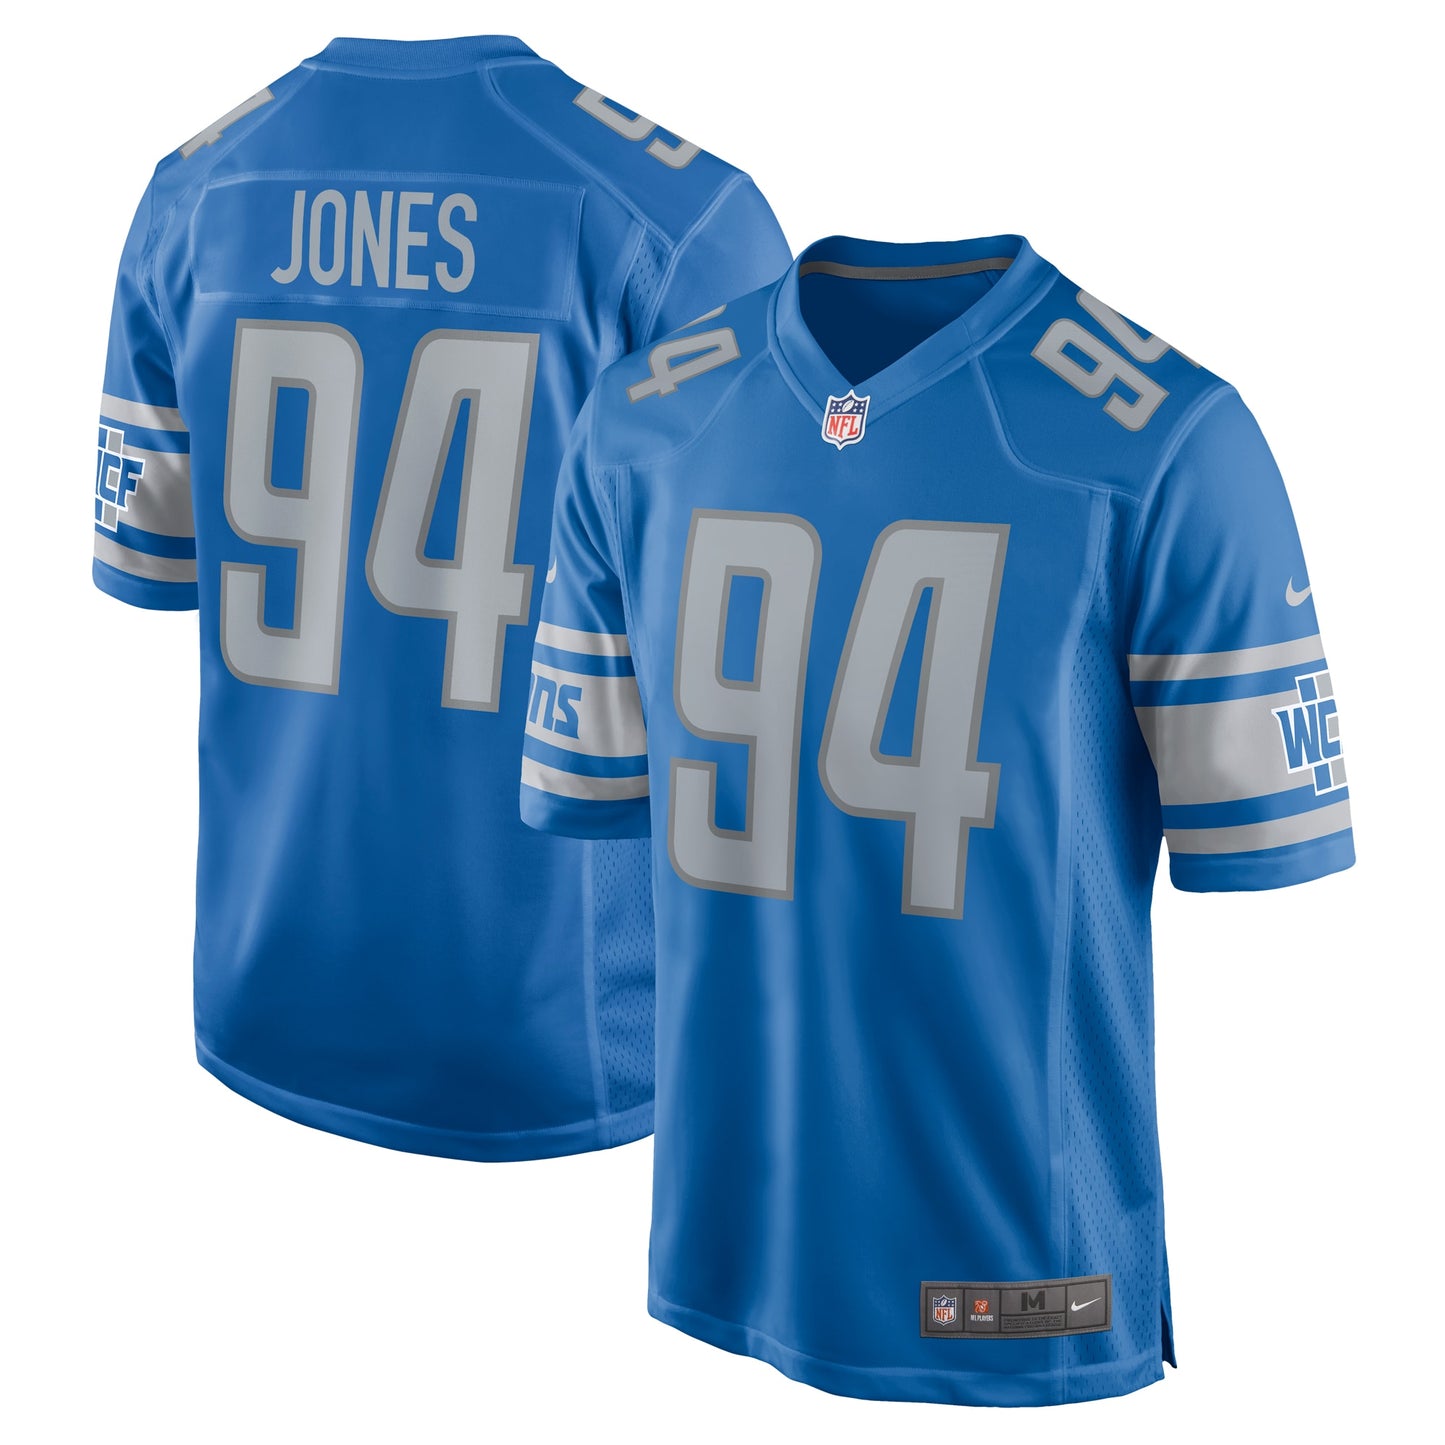 Benito Jones Detroit Lions Nike Home Game Player Jersey - Blue